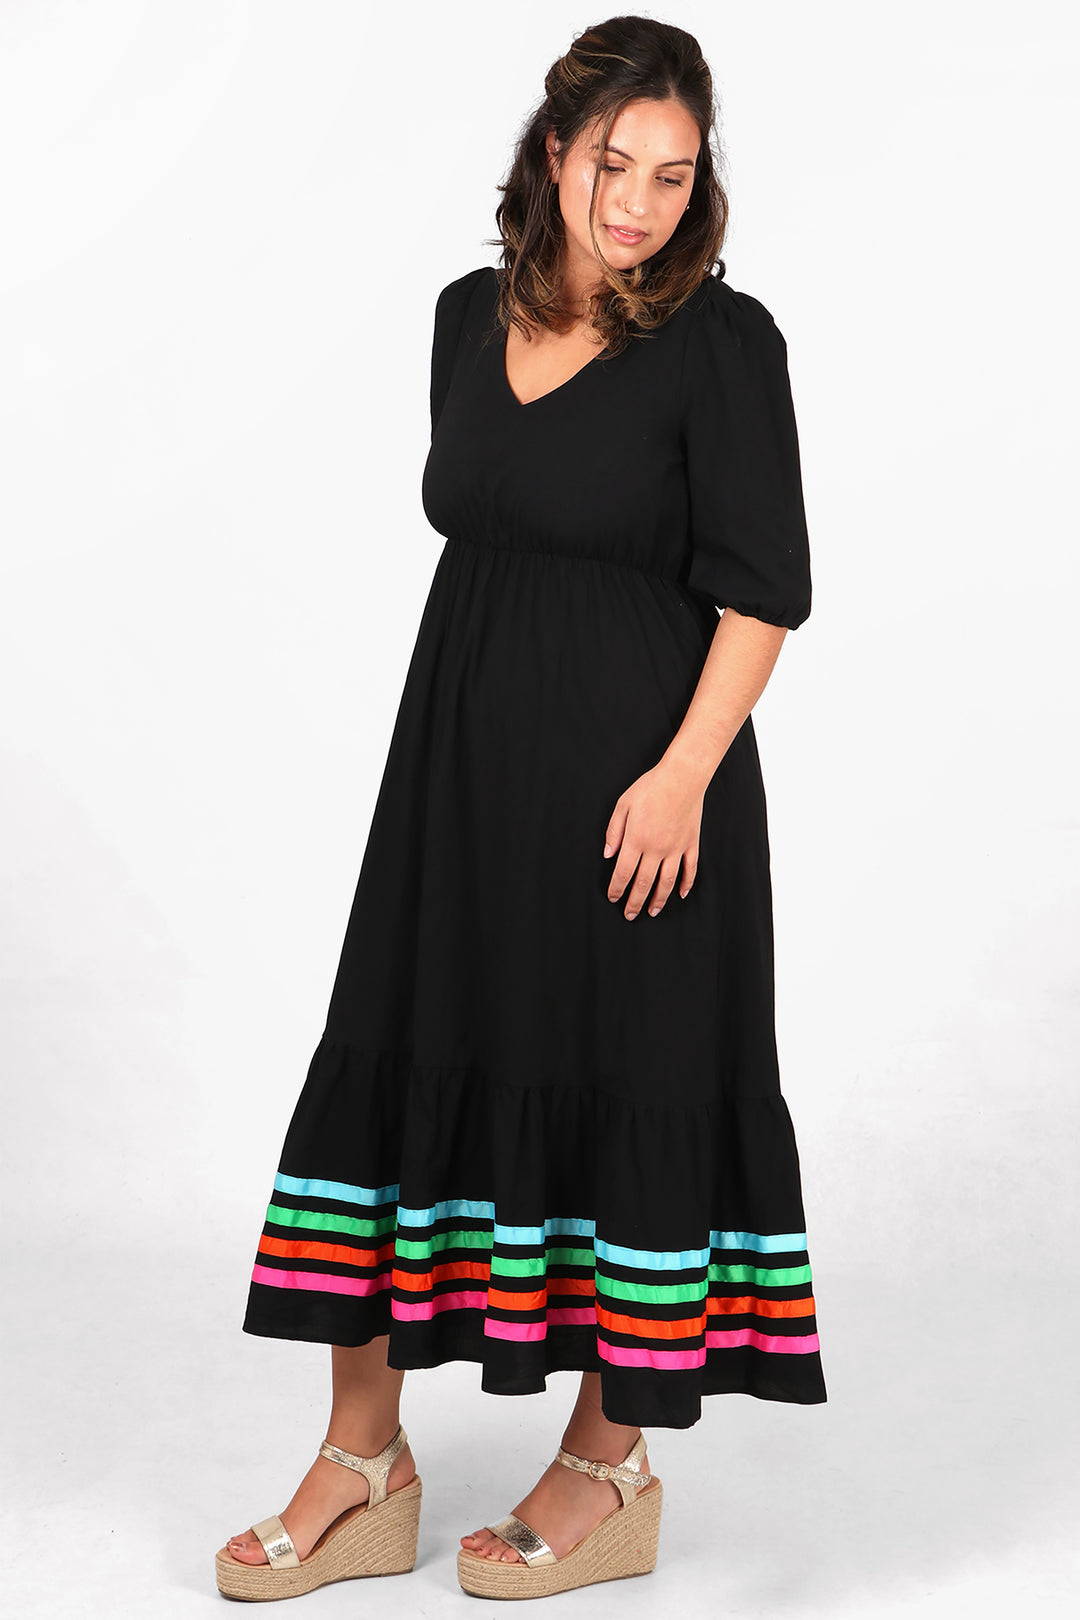 model wearing a black midaxi length dress with four horizontal rainbow ribbon stripes on the bottom tier of the dress, dress has a v neck and elbow length short sleeves